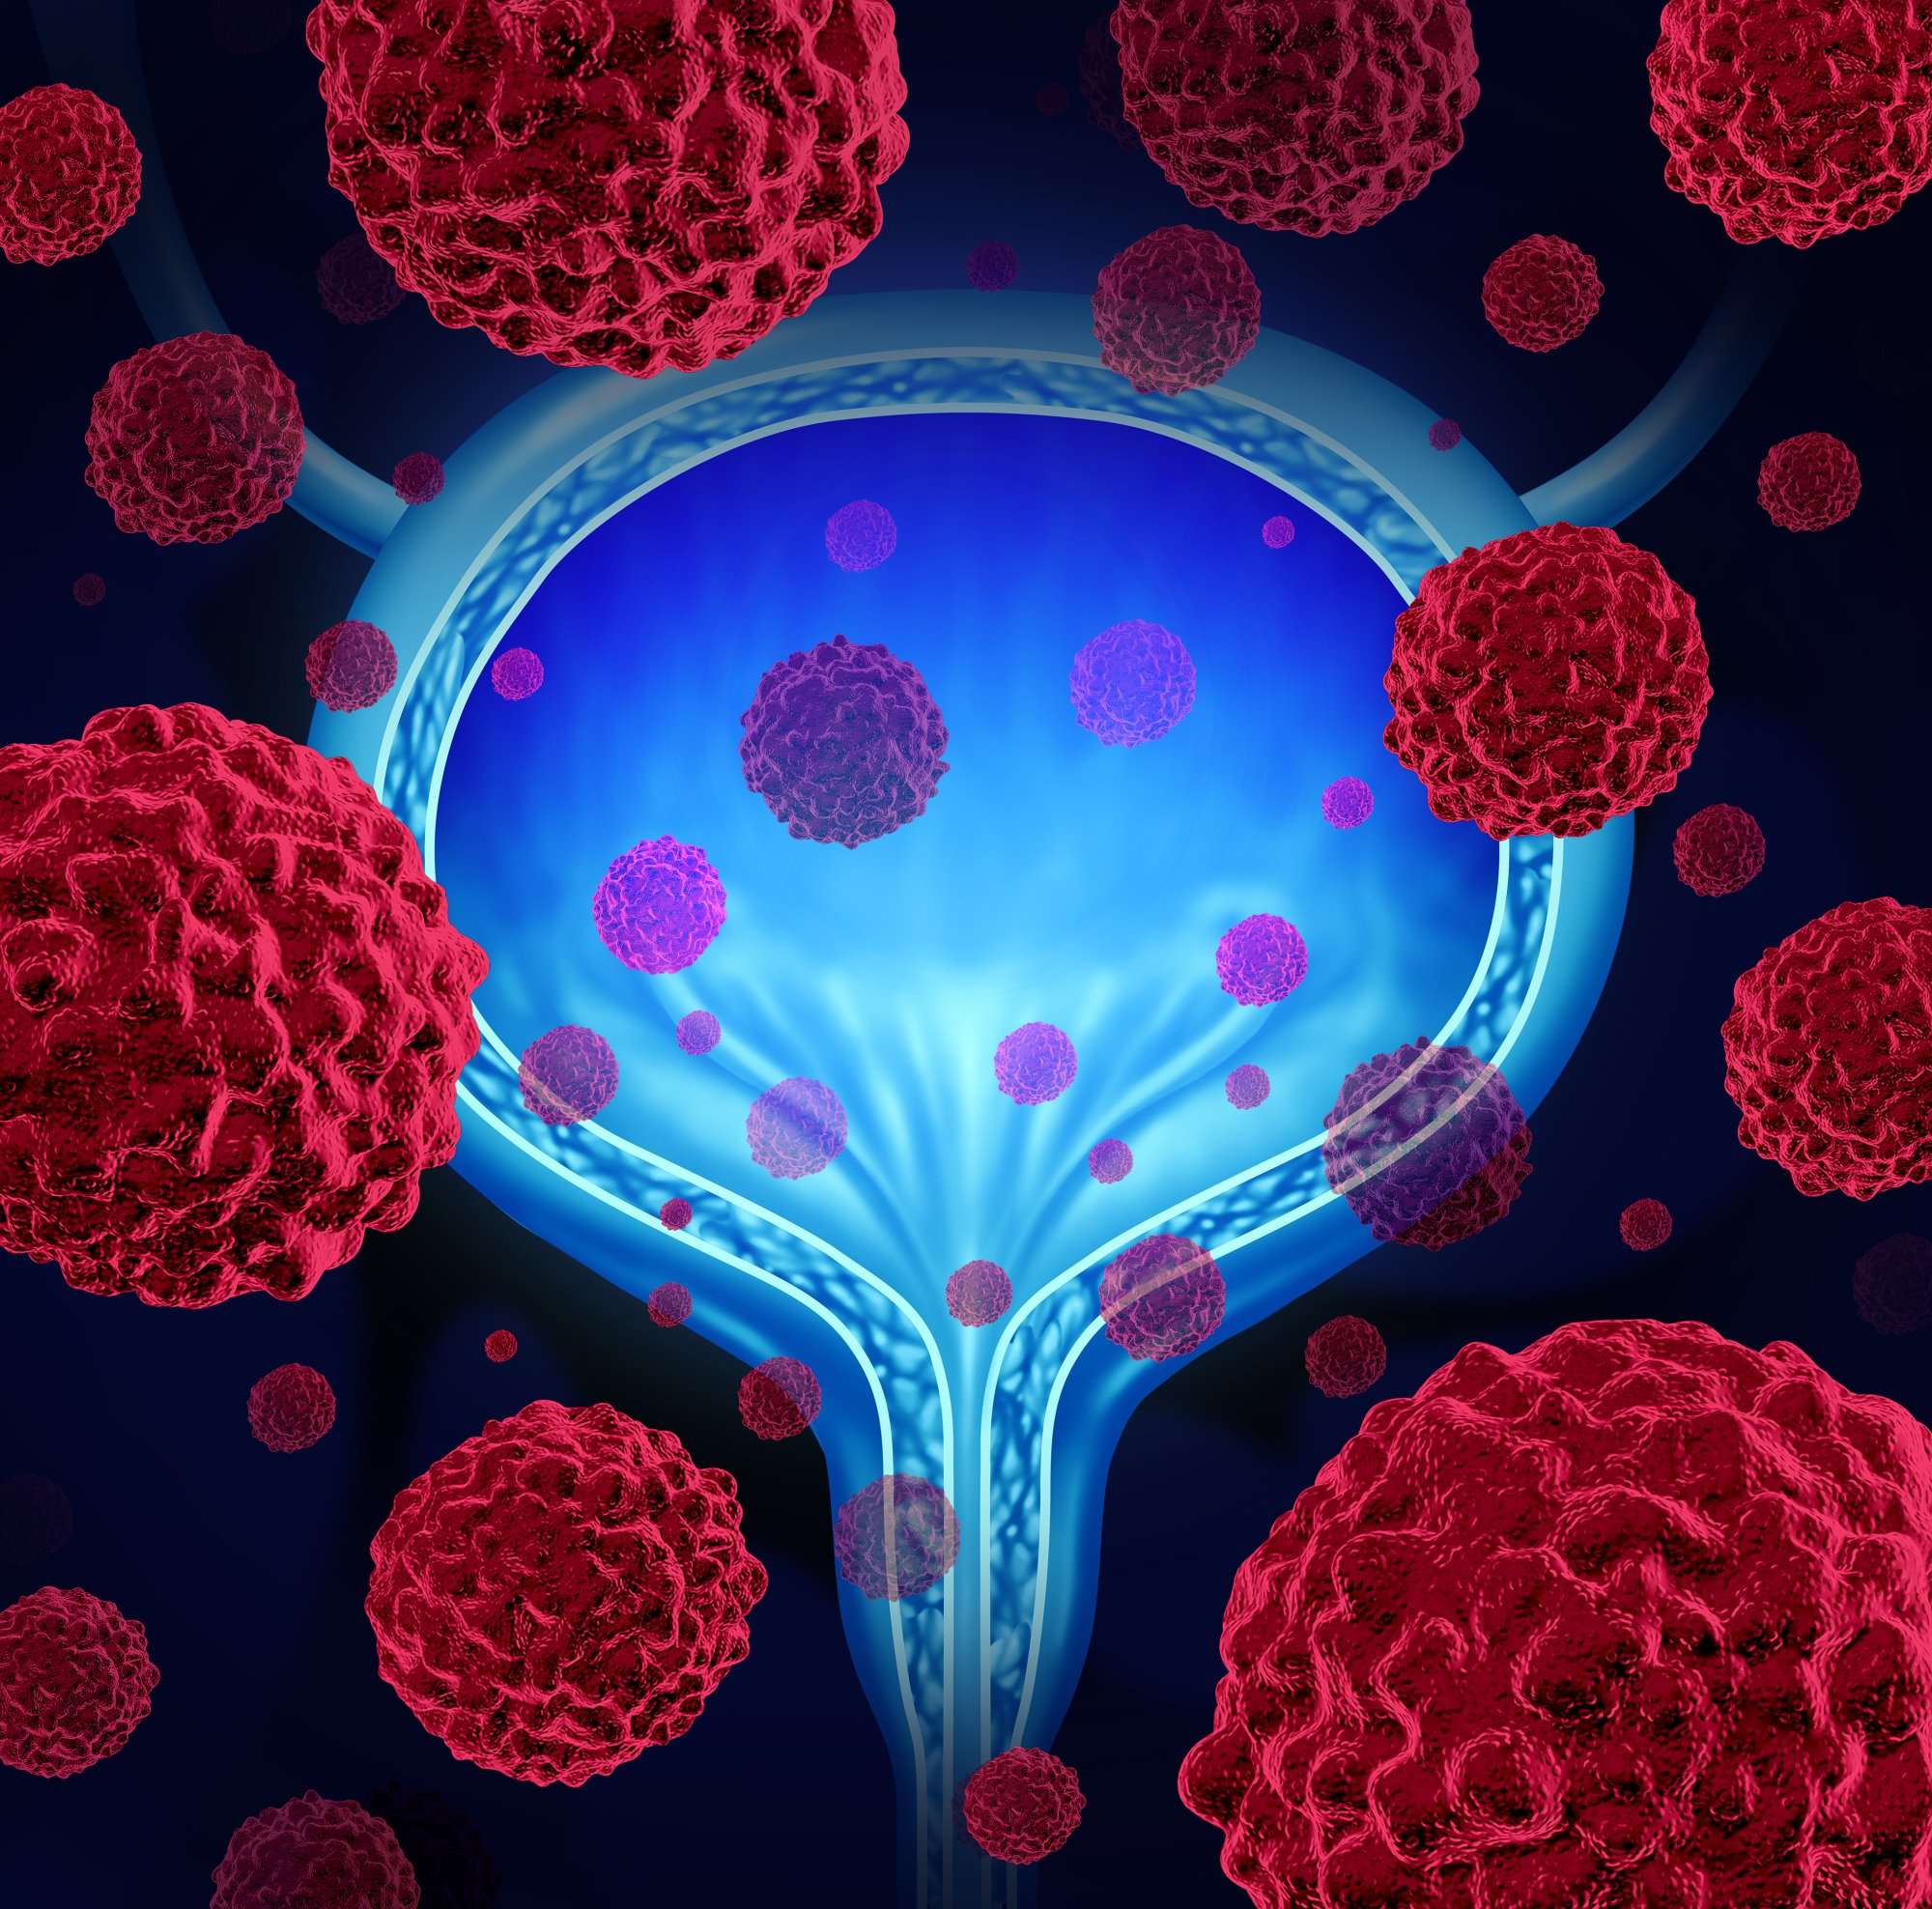 Blue Light Cystoscopy Increases Bladder Cancer Detection Rate